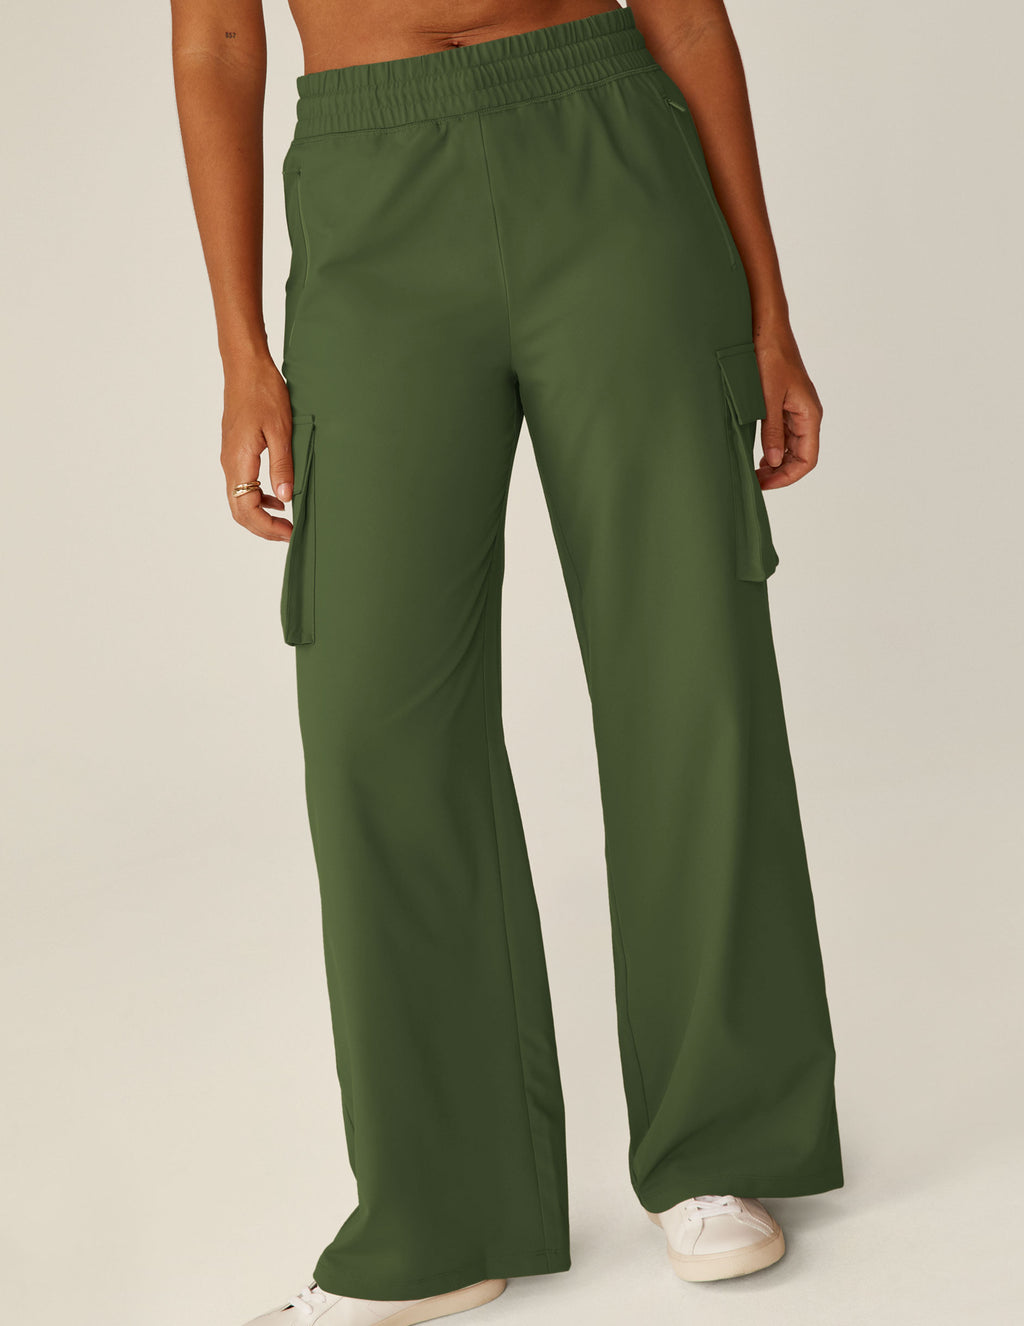 City Chic Cargo Pant Secondary Image